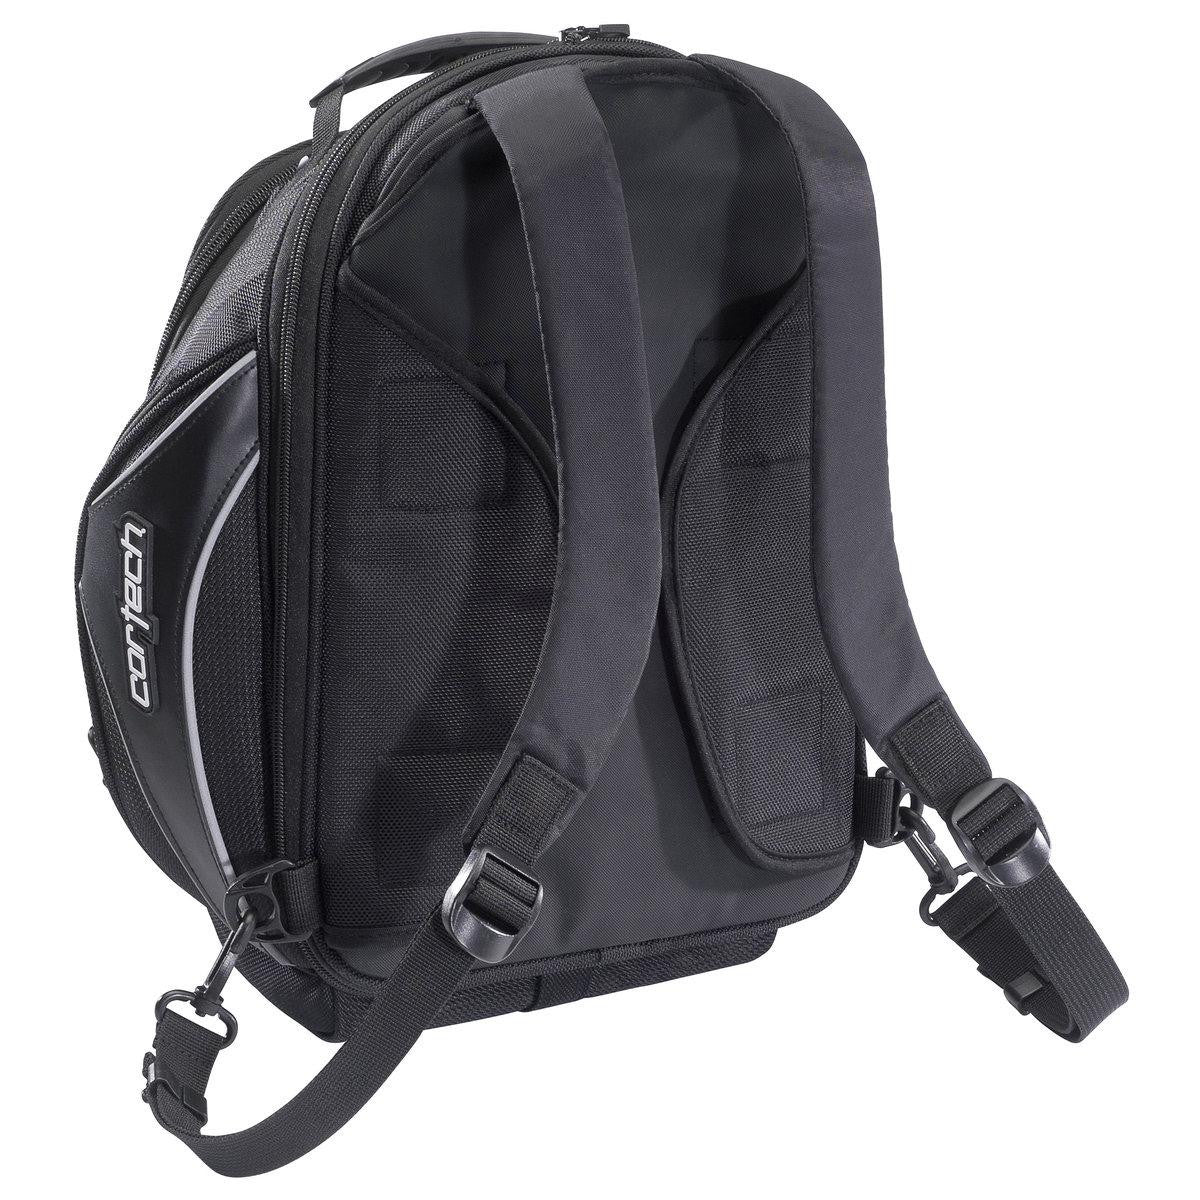 Cortech Super 2.0 18L Tank Bag with Magnetic Mount